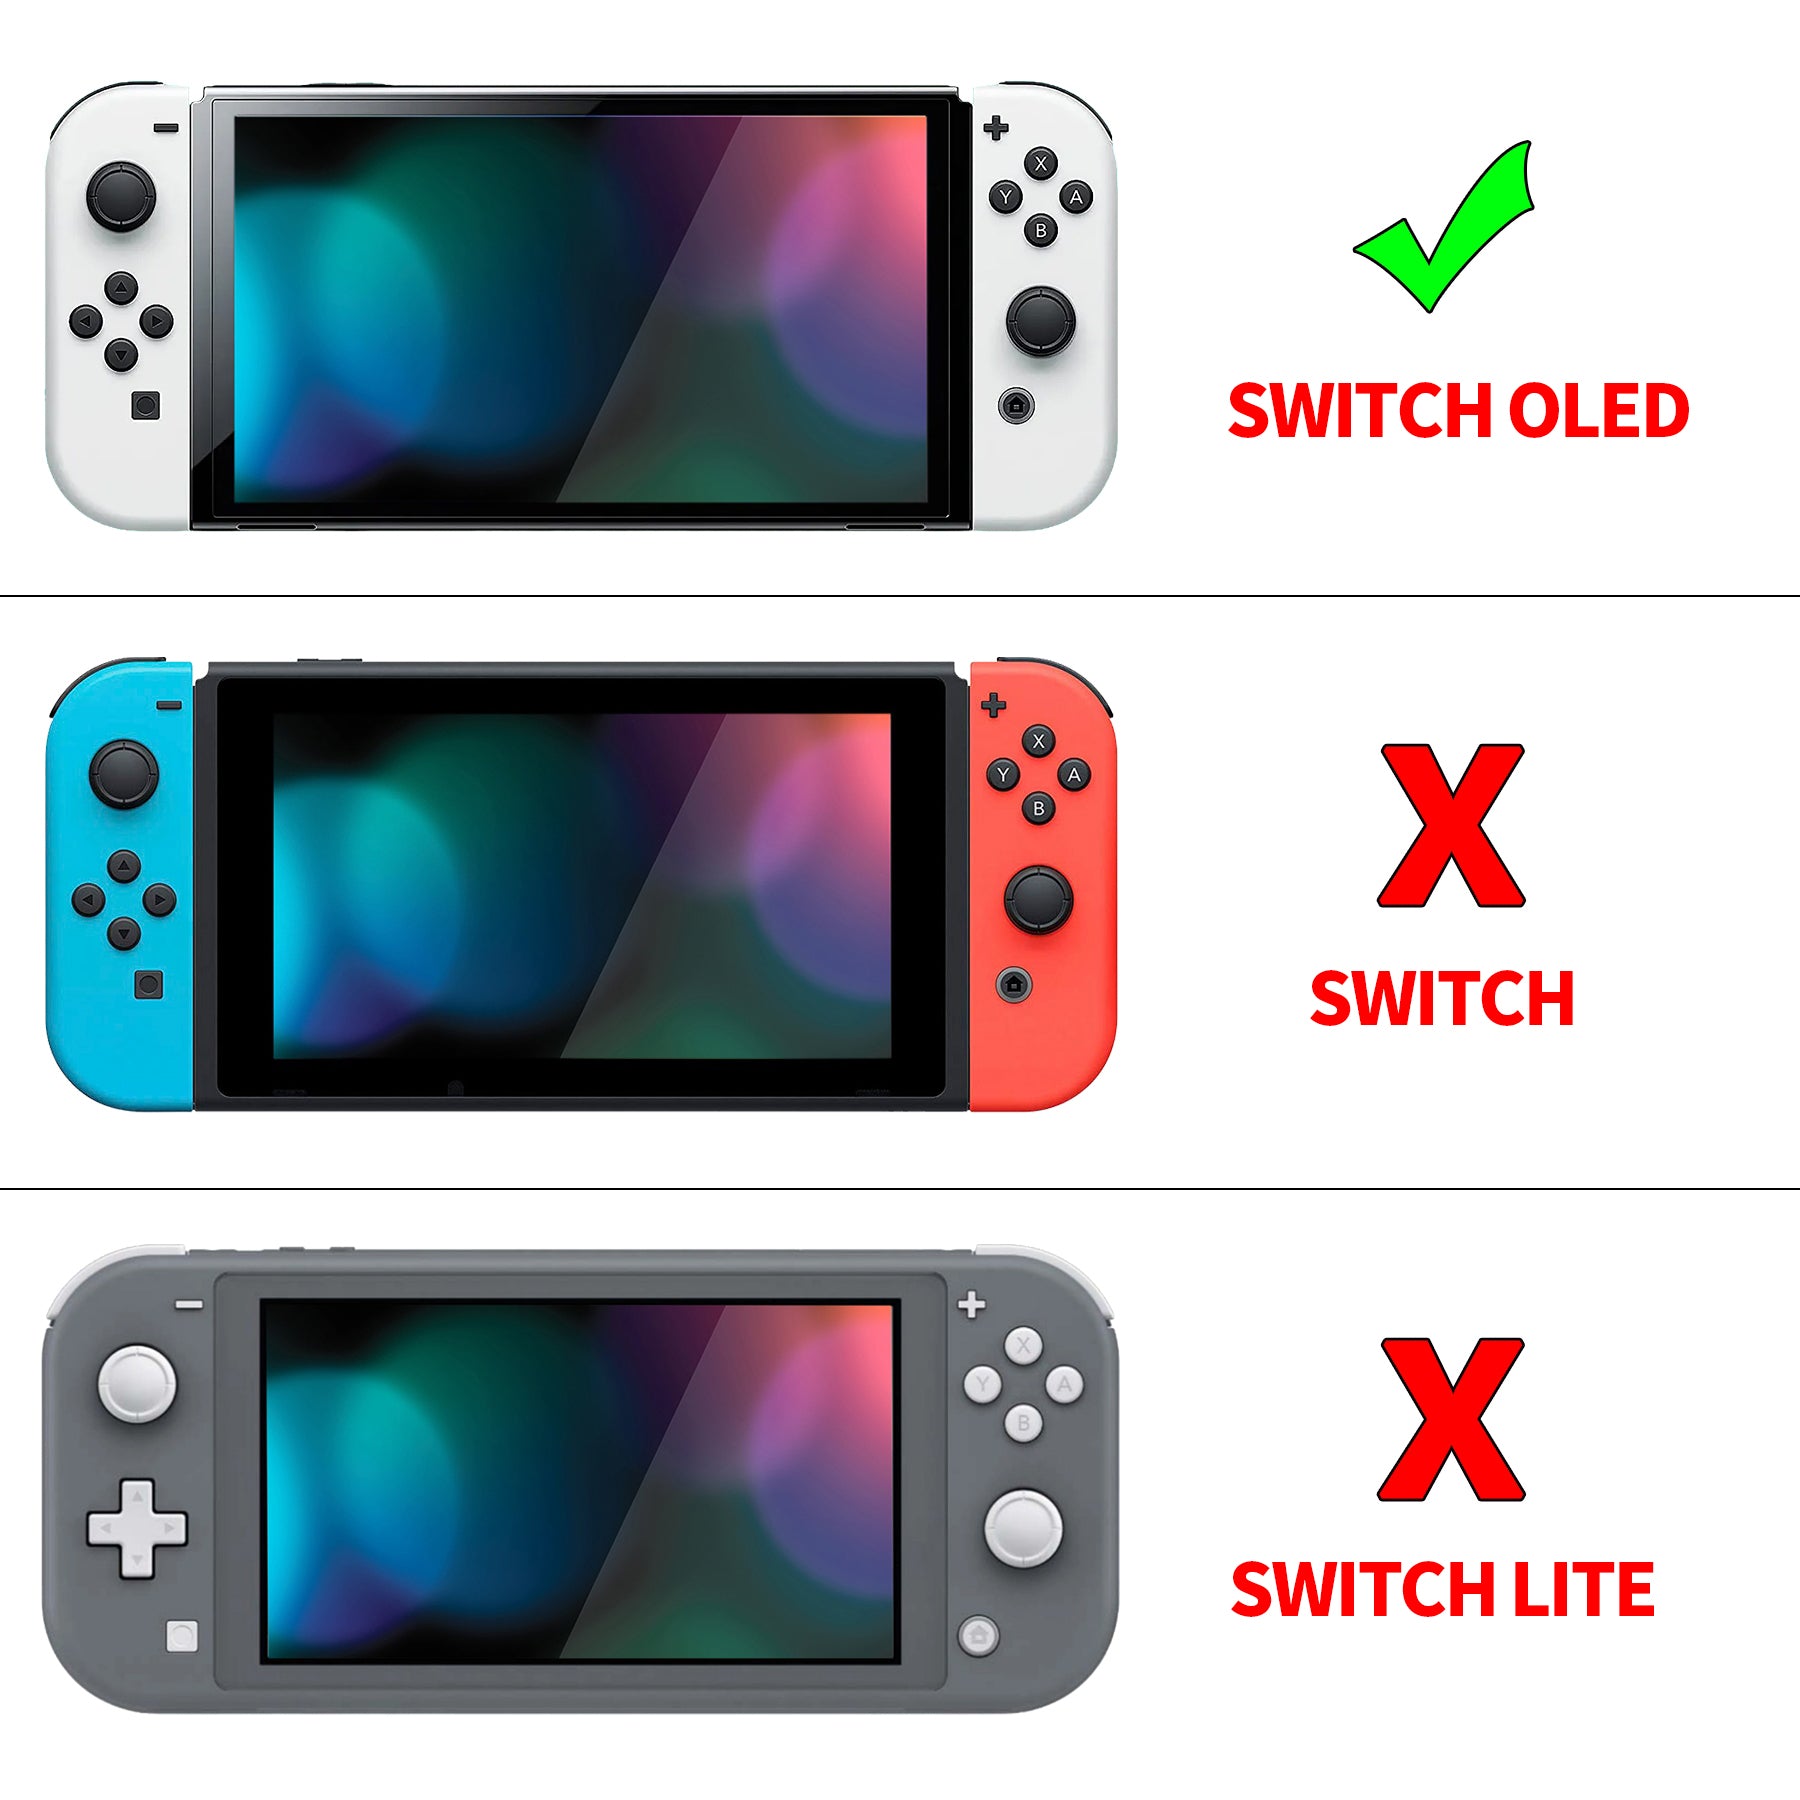 PlayVital ZealProtect Soft Protective Case for Switch OLED, Flexible Protector Joycon Grip Cover for Switch OLED with Thumb Grip Caps & ABXY Direction Button Caps - Hamster & Sunflower - XSOYV6018 playvital